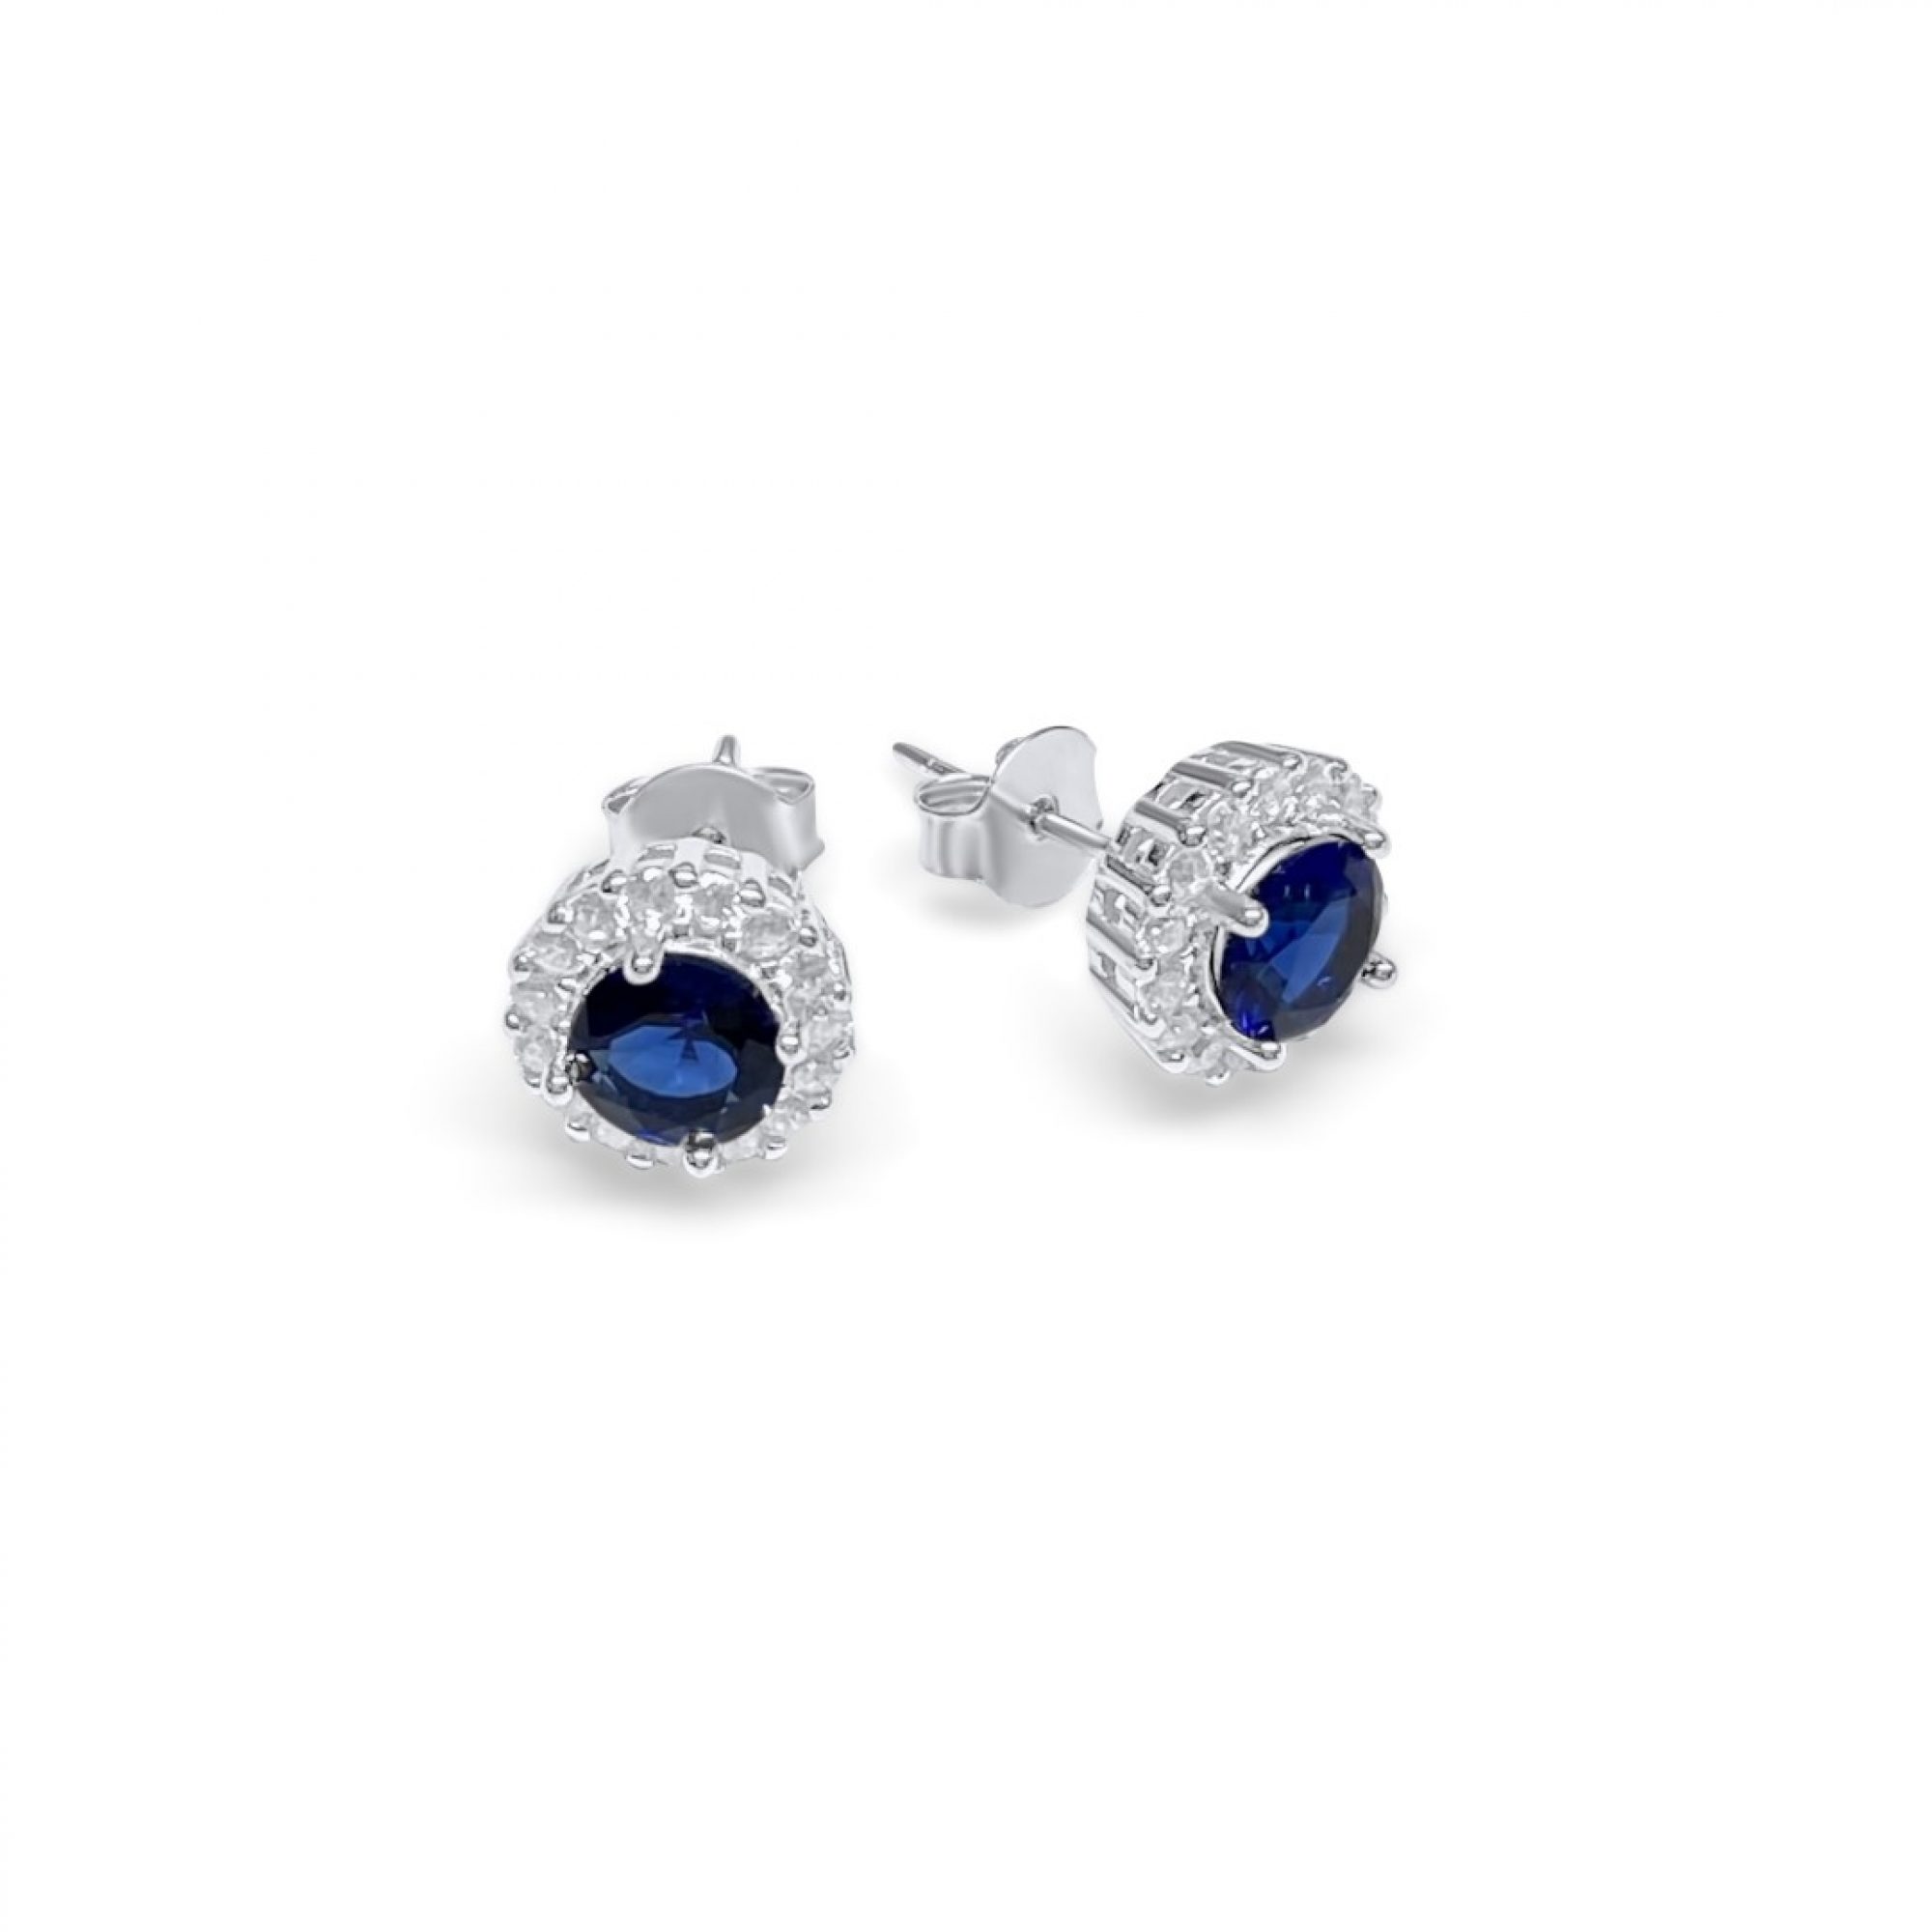 Silver stud earrings with sapphire and  zircon stones